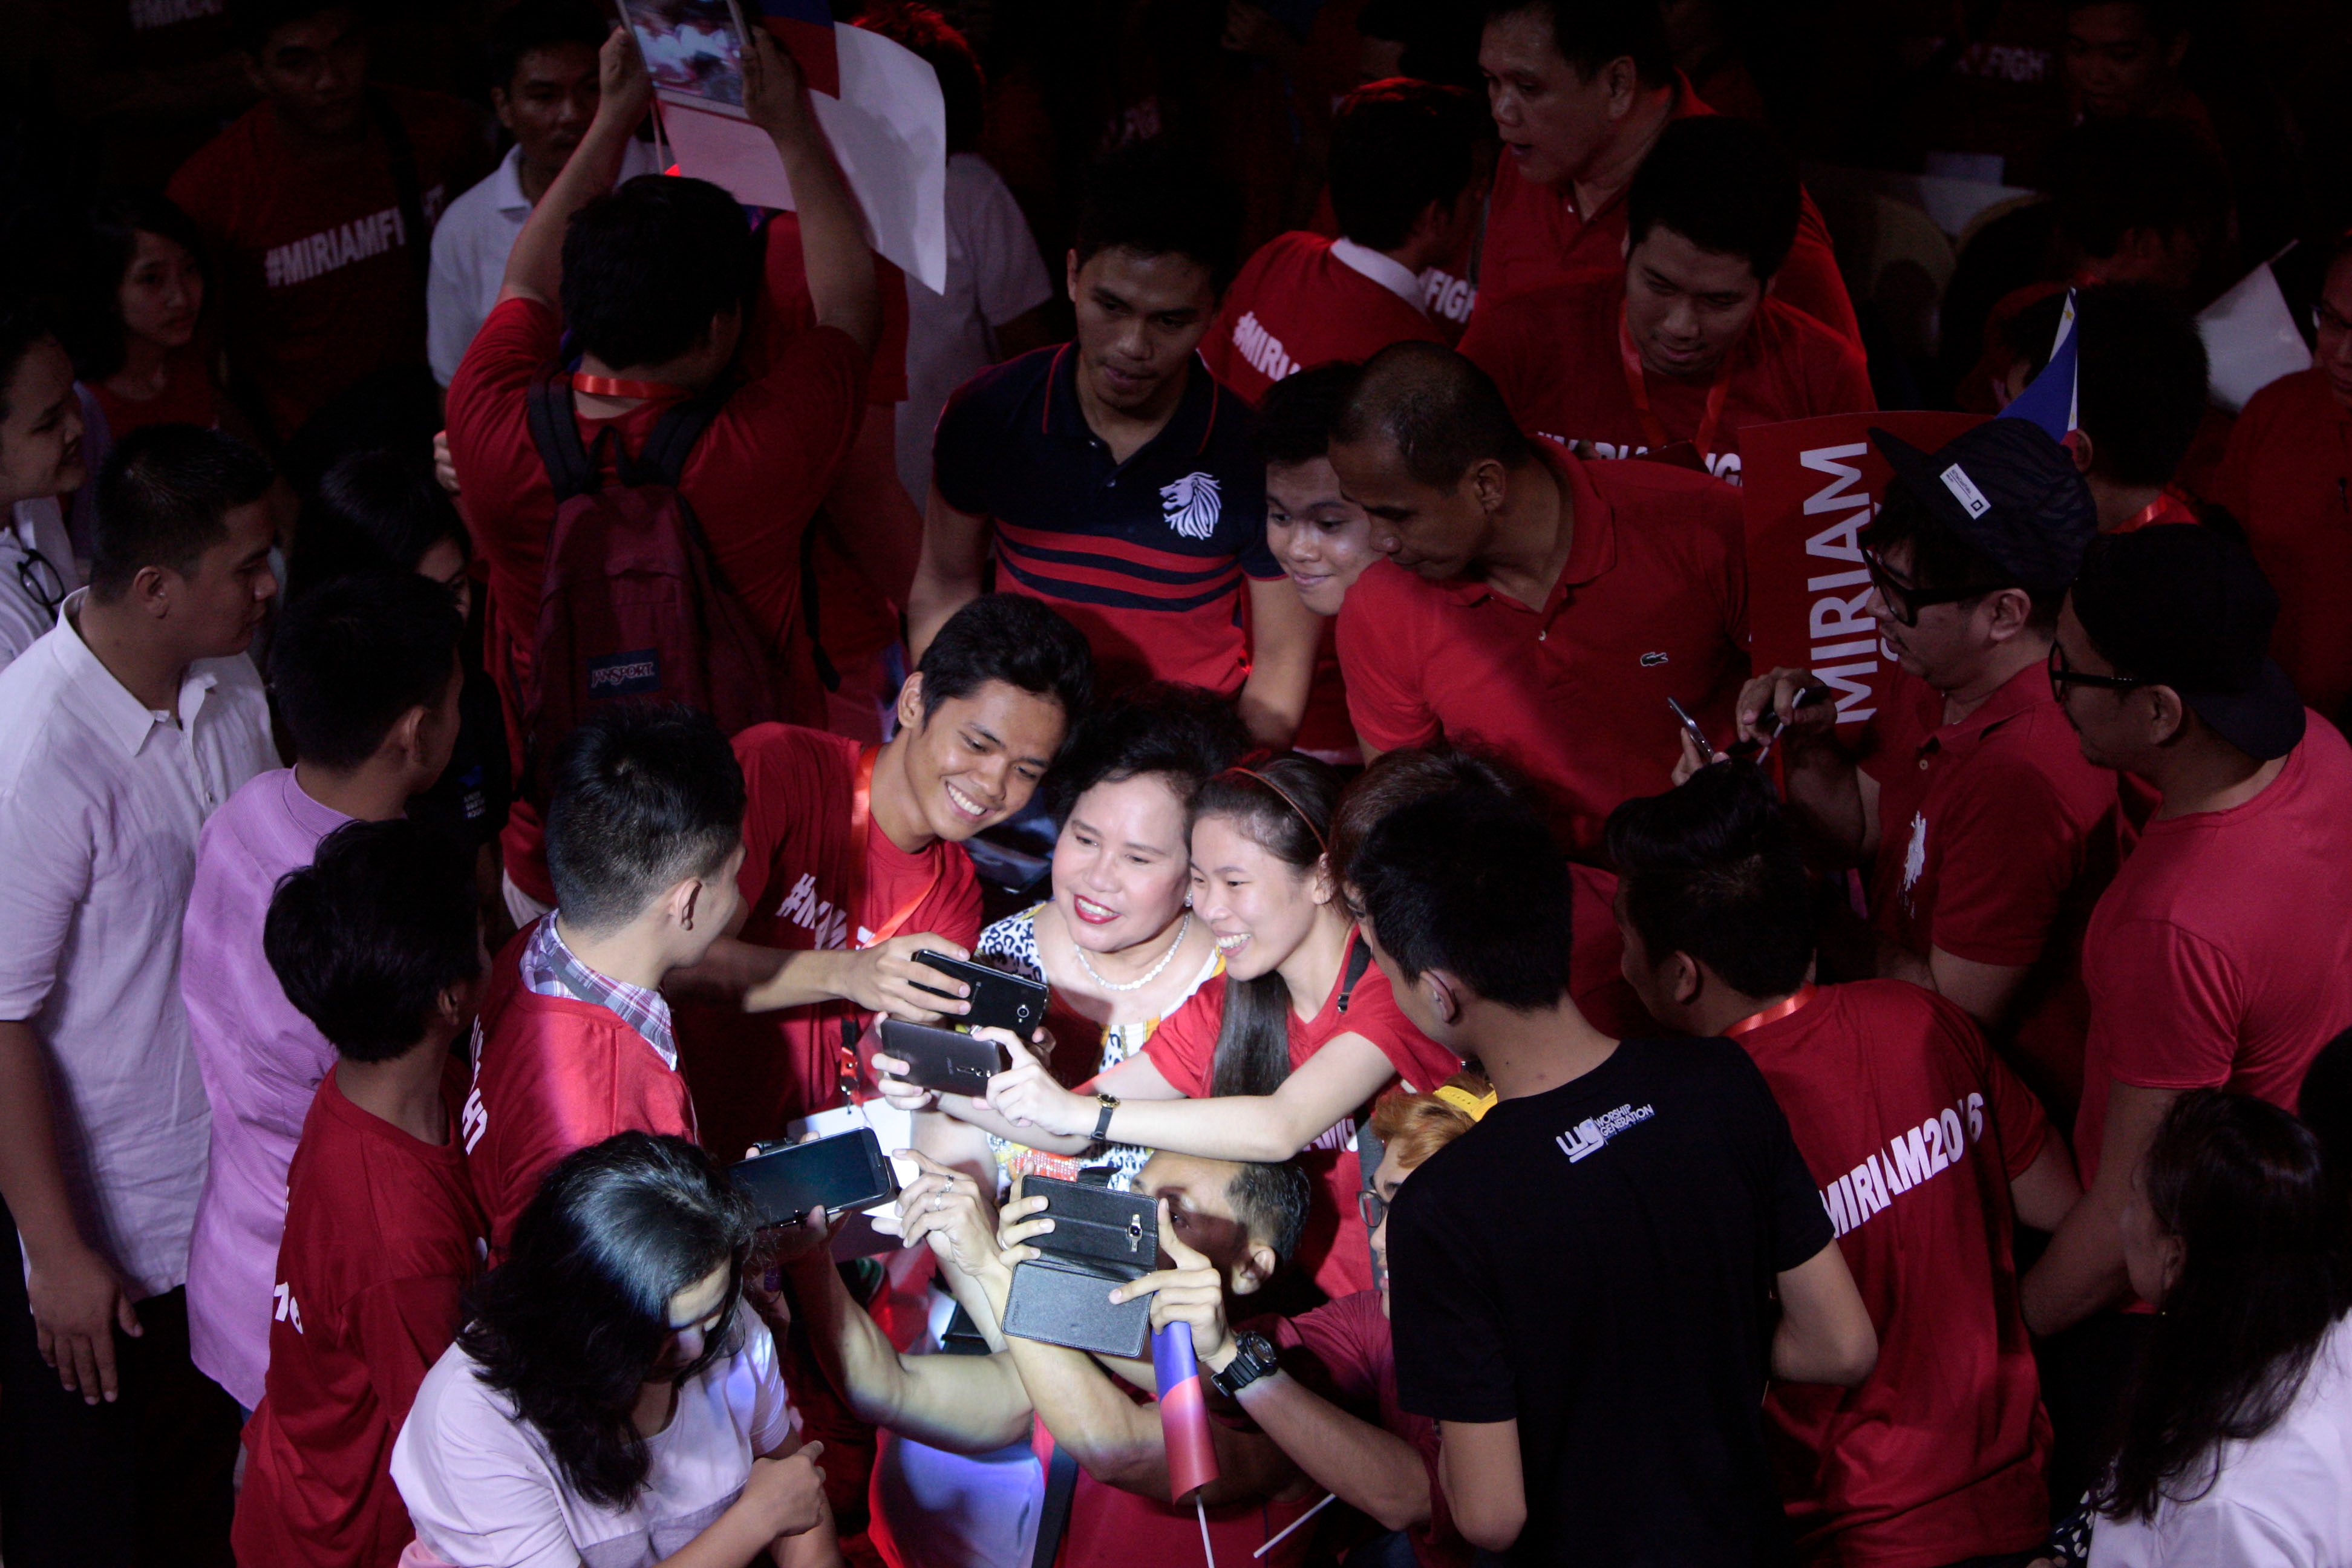 'ROCK STAR.' Senator Miriam Defensor Santiago takes selfies with supporters at the University of the Philippines Bahay ng Alumni in Quezon City on Monday, October 26, 2015. Photo by Ben Nabong/Rappler 